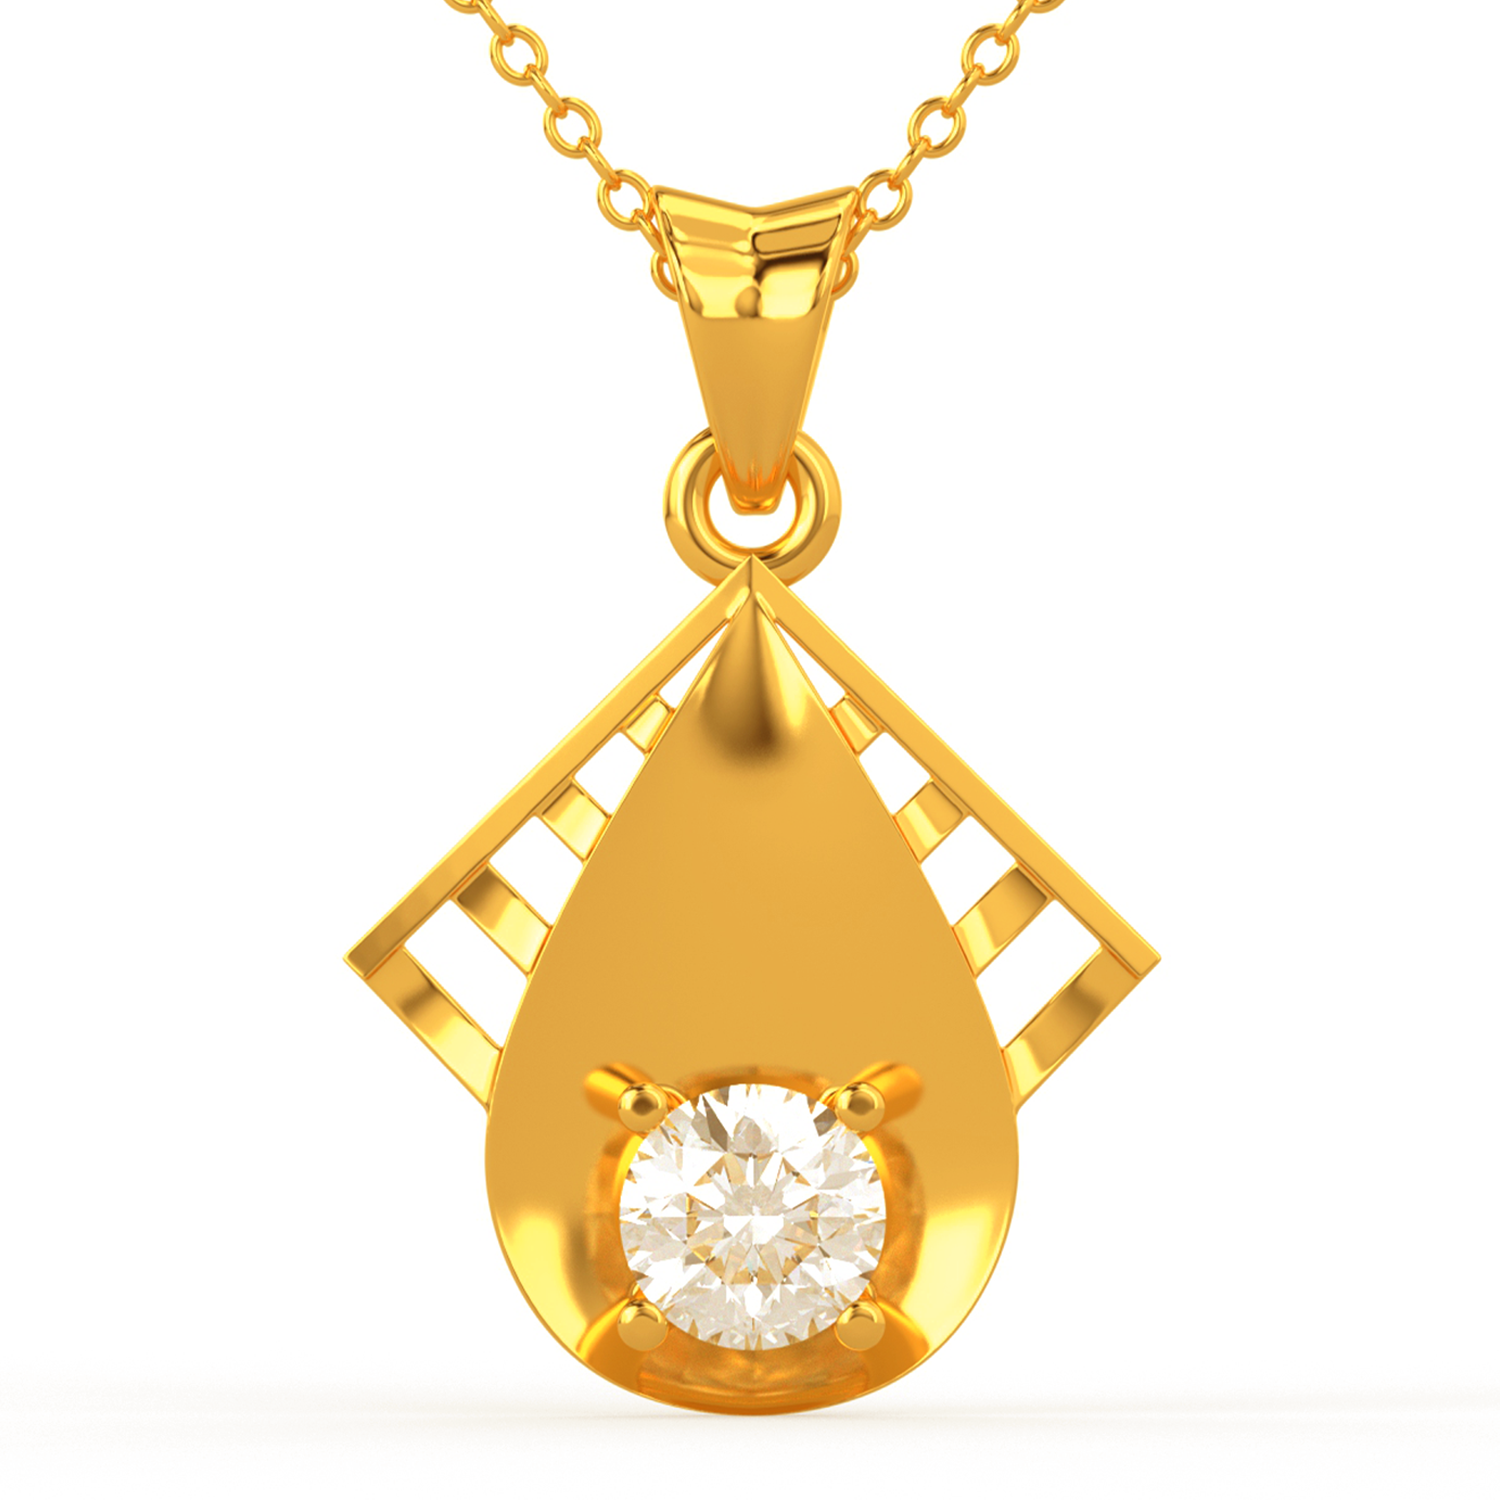 Droplet Shaped Gold and Diamond Pendant